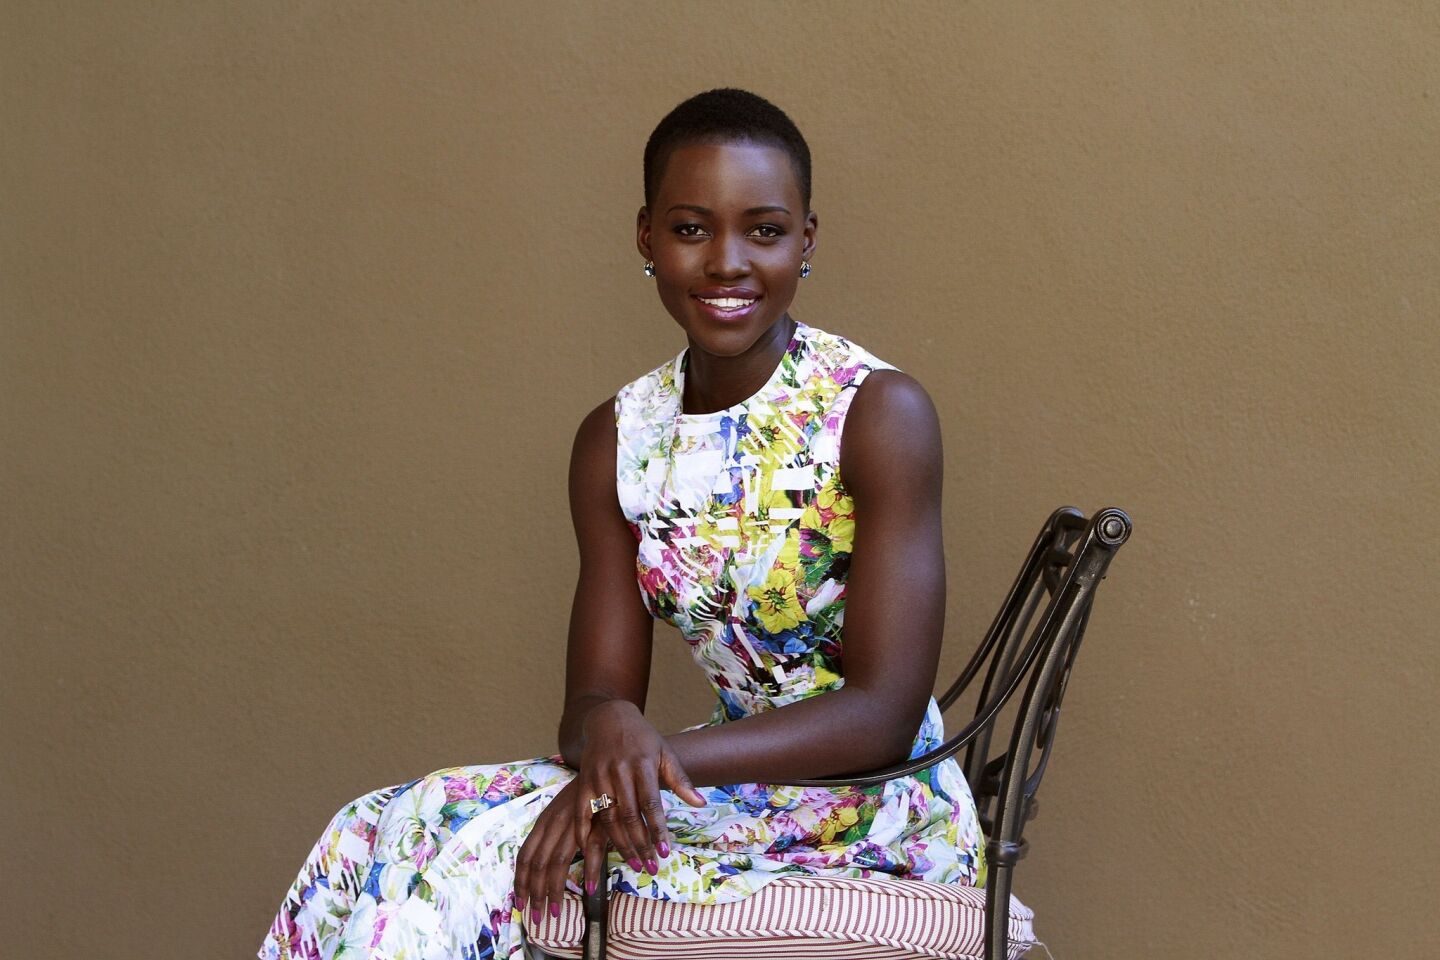 Actress Lupita Nyong'o is one of the stars of "12 Years a Slave."